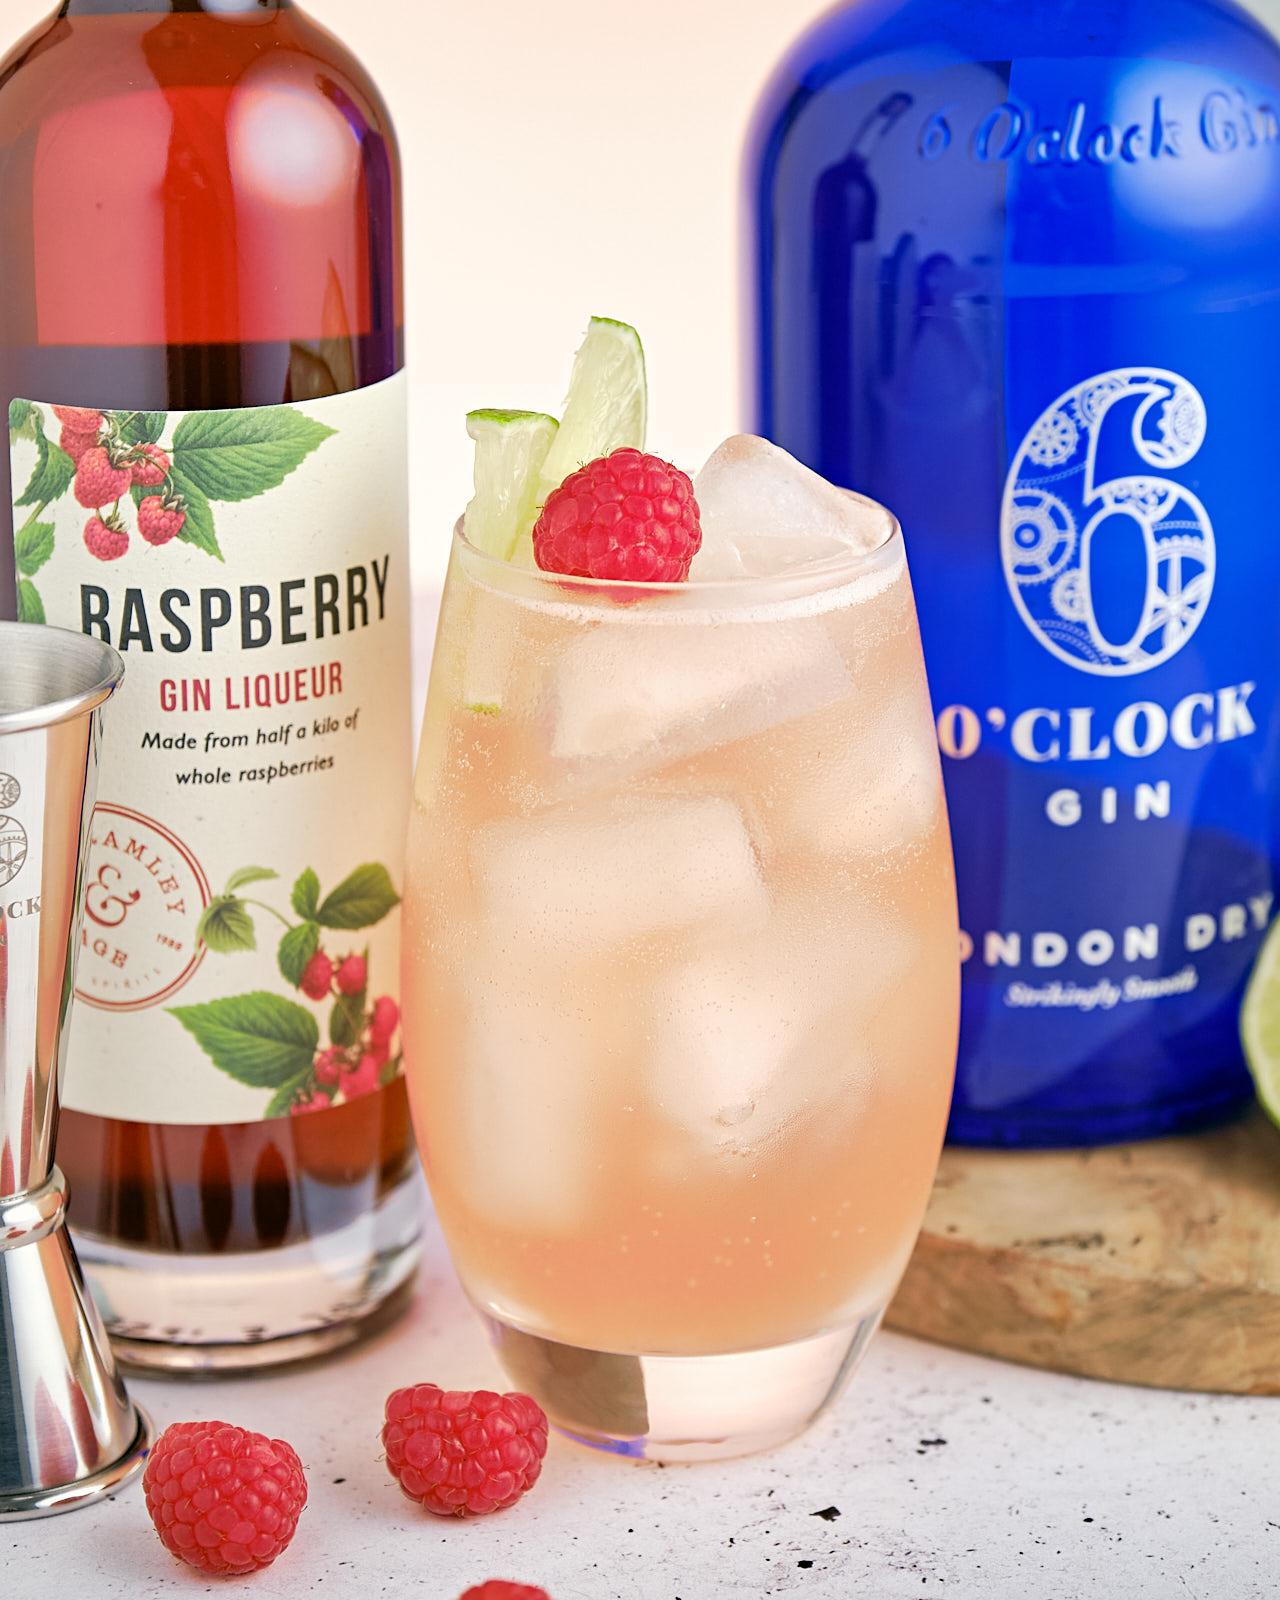 The Floradora gin cocktail - with Raspberry, Lime & Ginger Ales